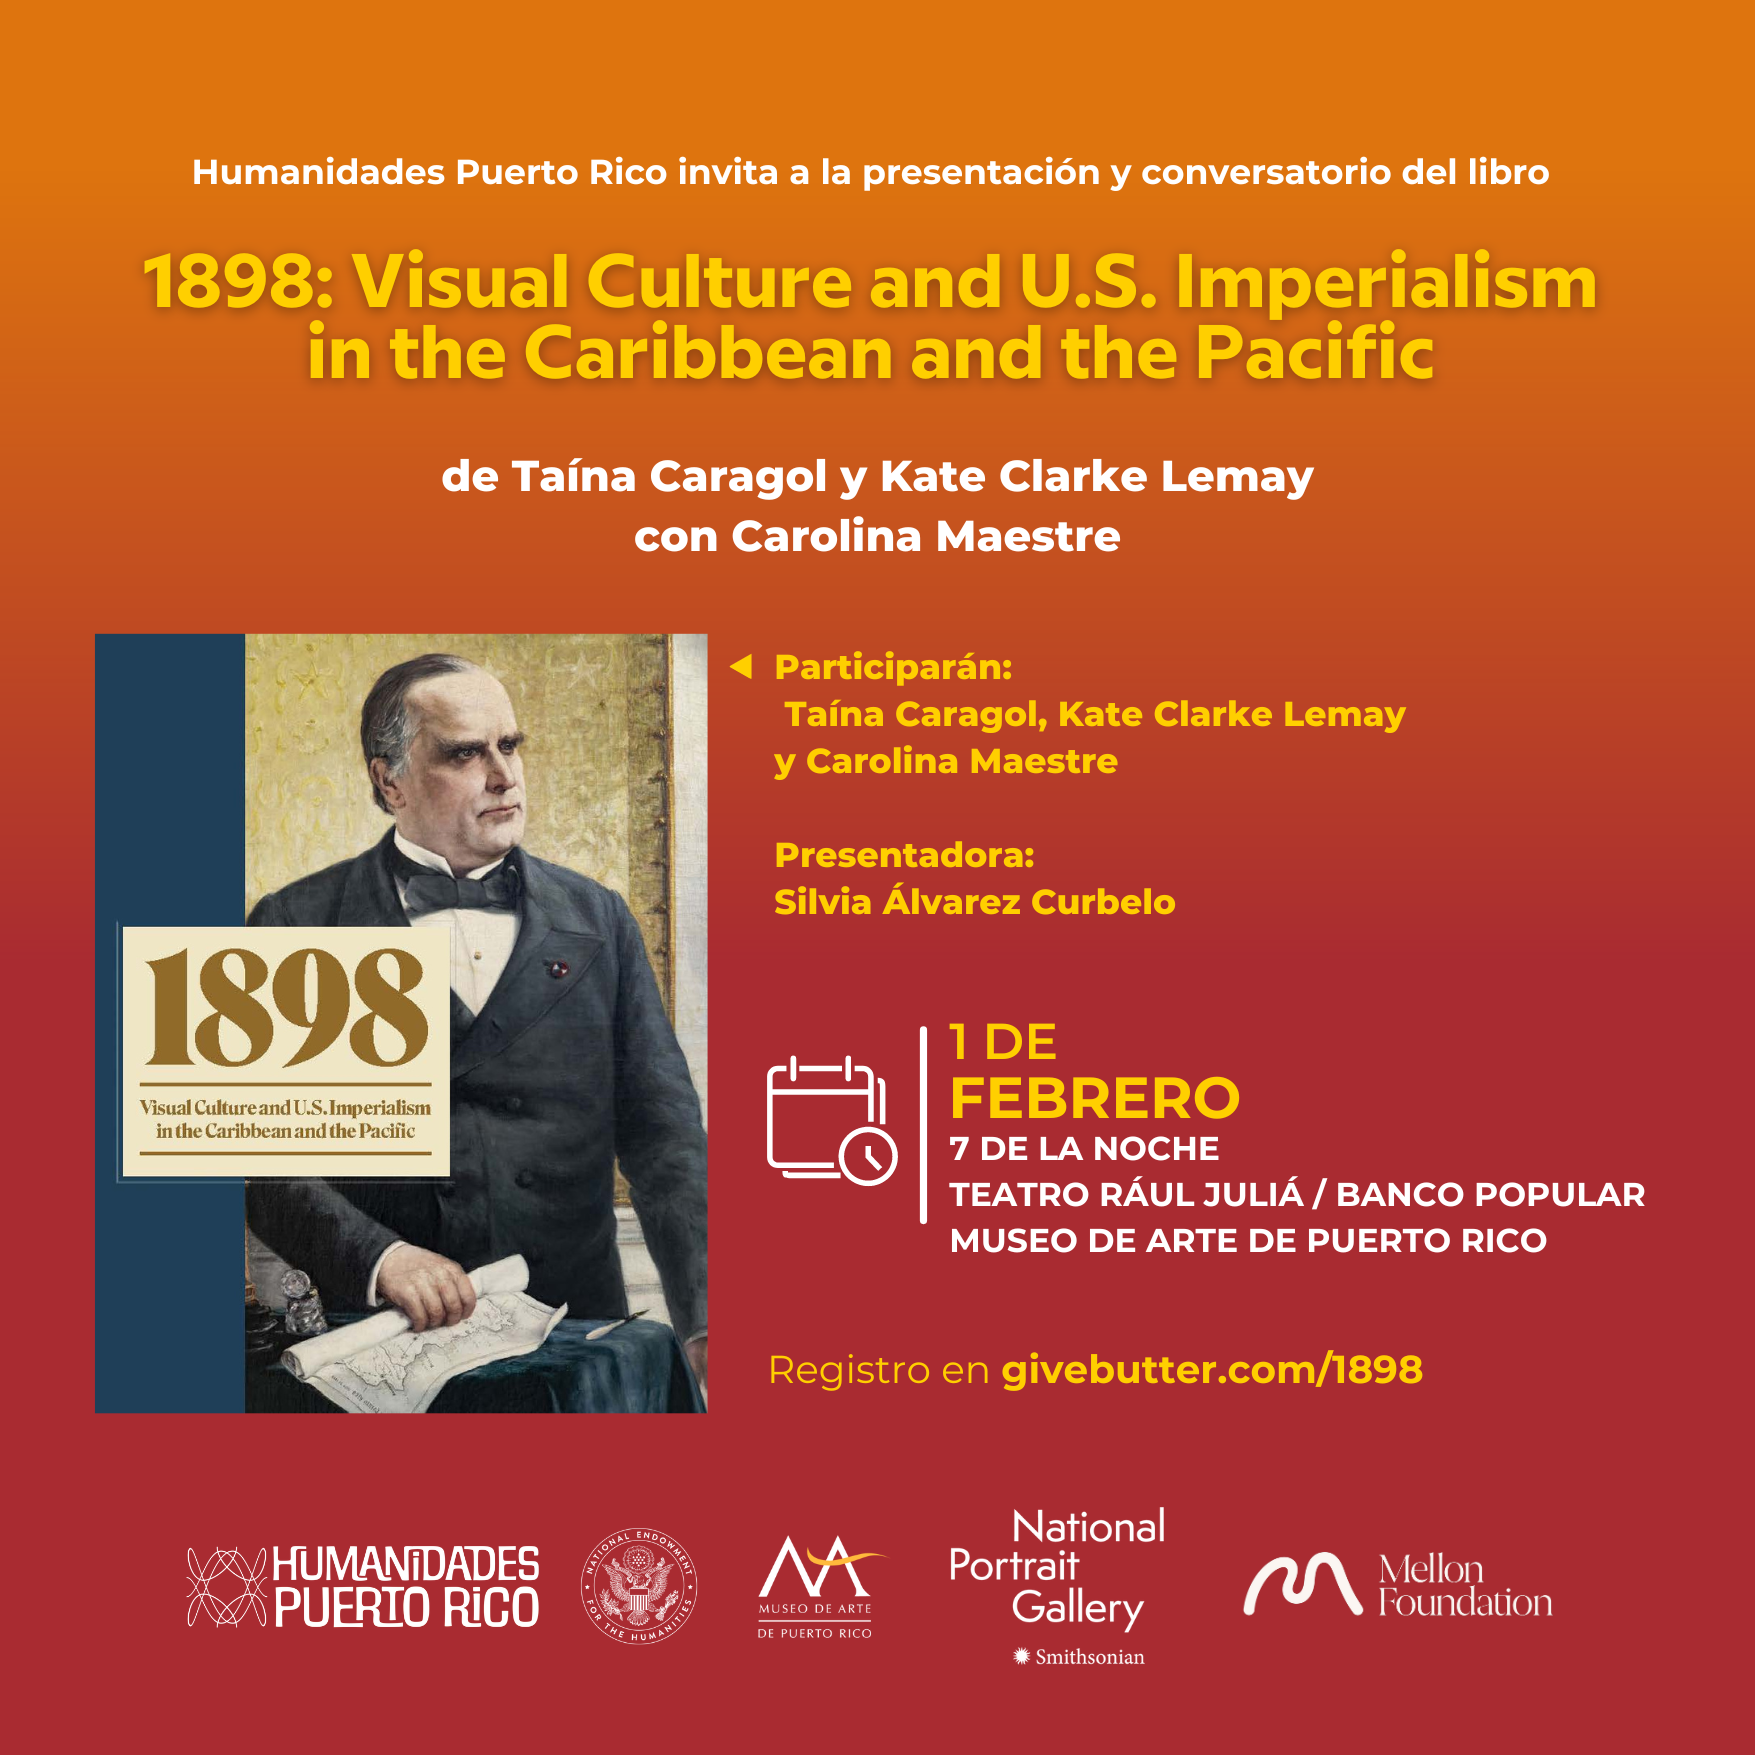 1898: Visual Culture and U.S. Imperialism in the Caribbean and the Pacific